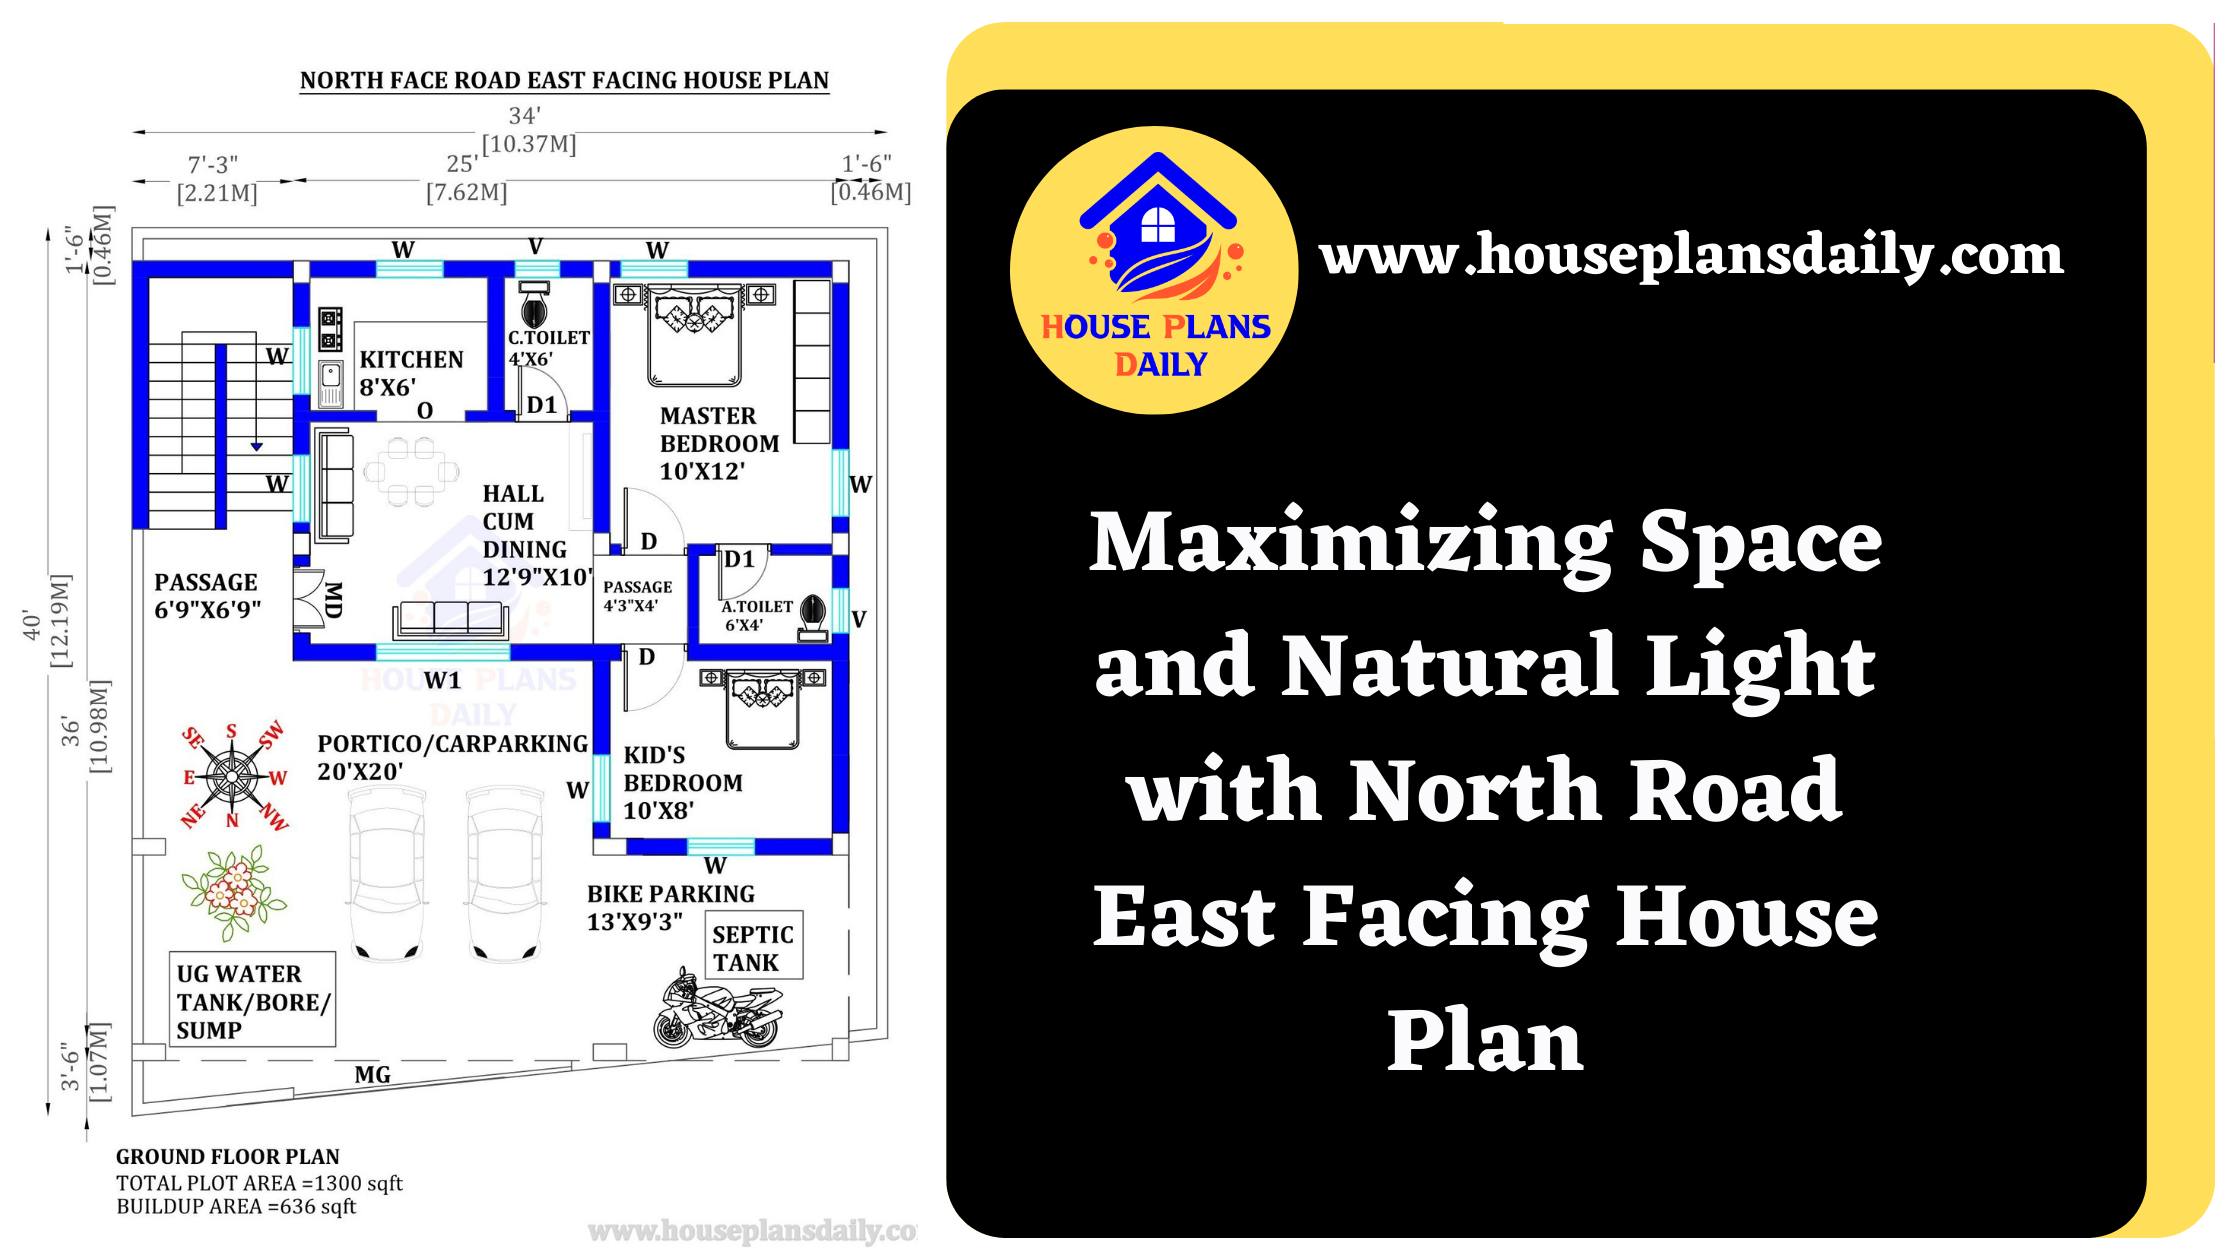 Maximizing Space and Natural Light with North Road East Facing House Plan